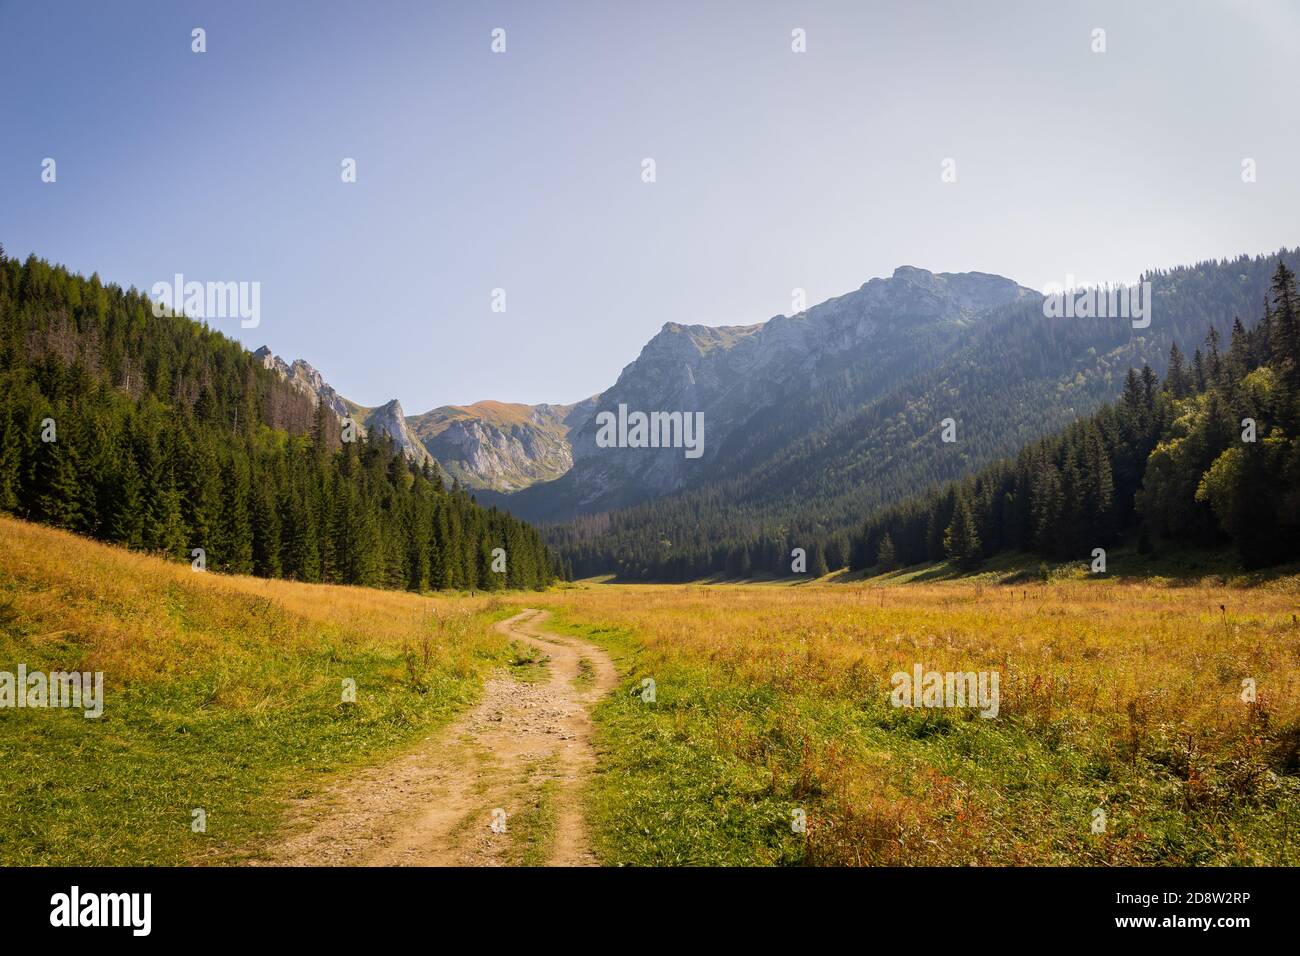 Mountain glade Wielka Polana Malolacka with pine trees and spruces in autumn, with rocky Tatra Mountains in the background, Poland. Stock Photo